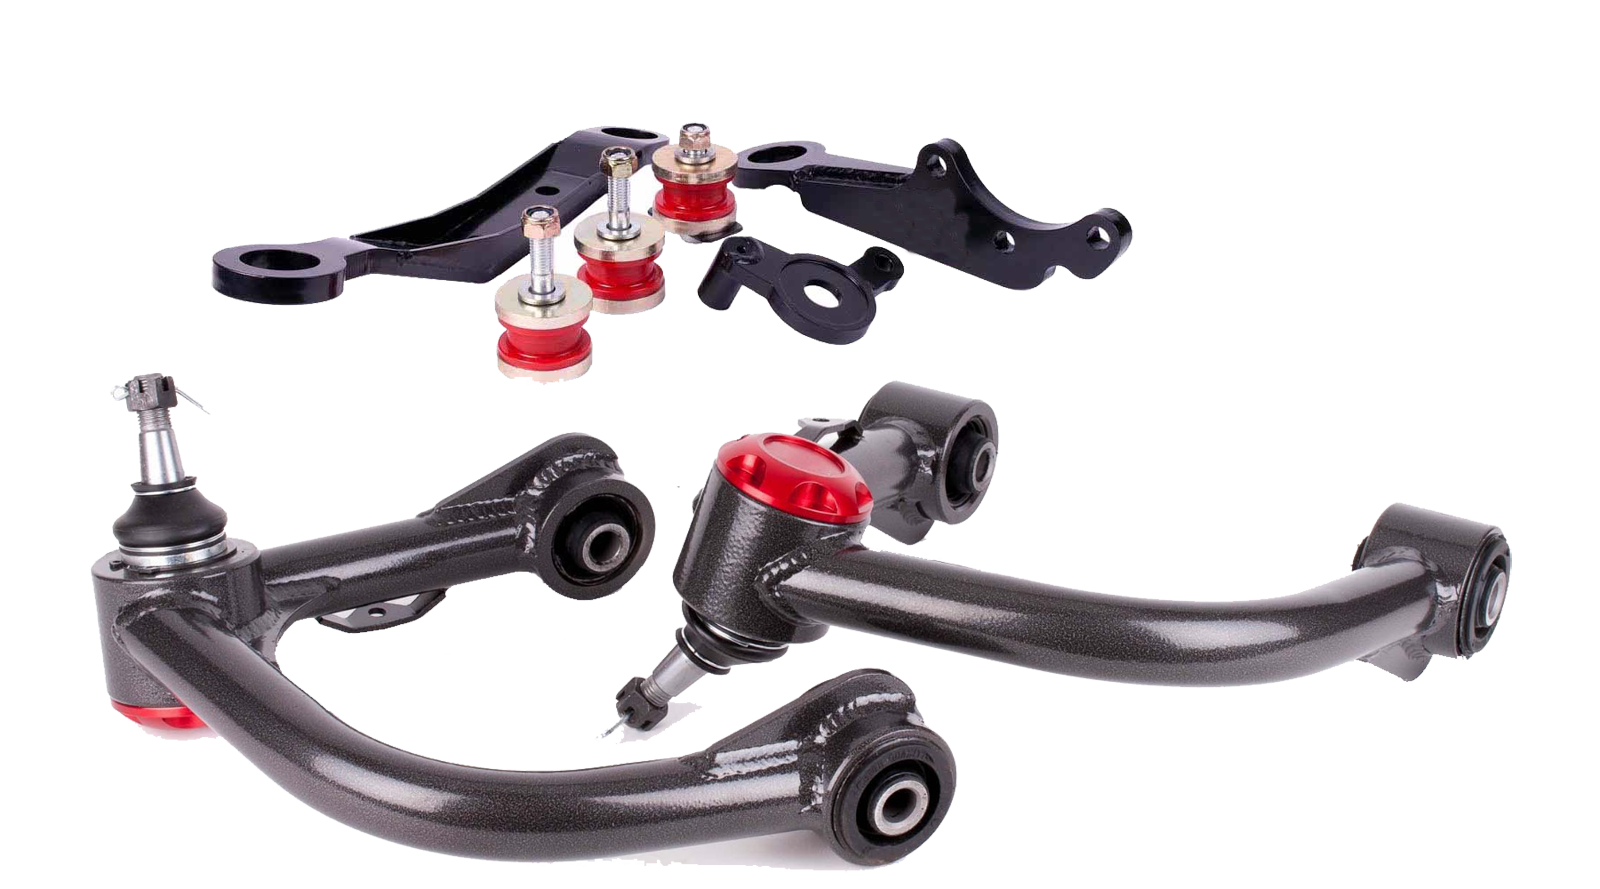 Why Use diff drop kits and upper control arms on your Ute?